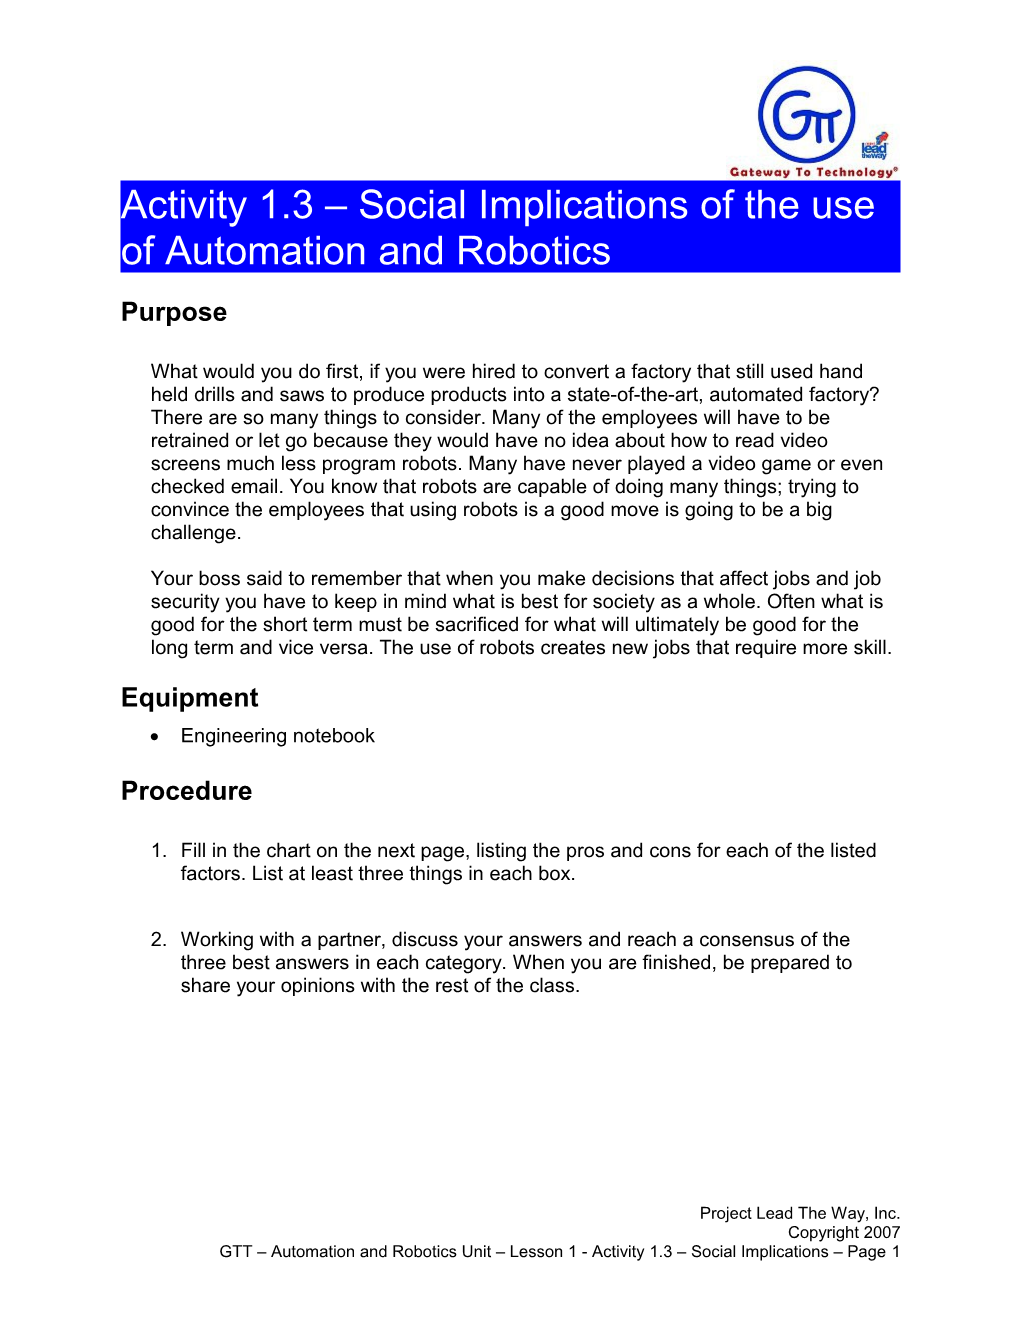 Activity 1.3 - Social Implications Of Automation And Robotics